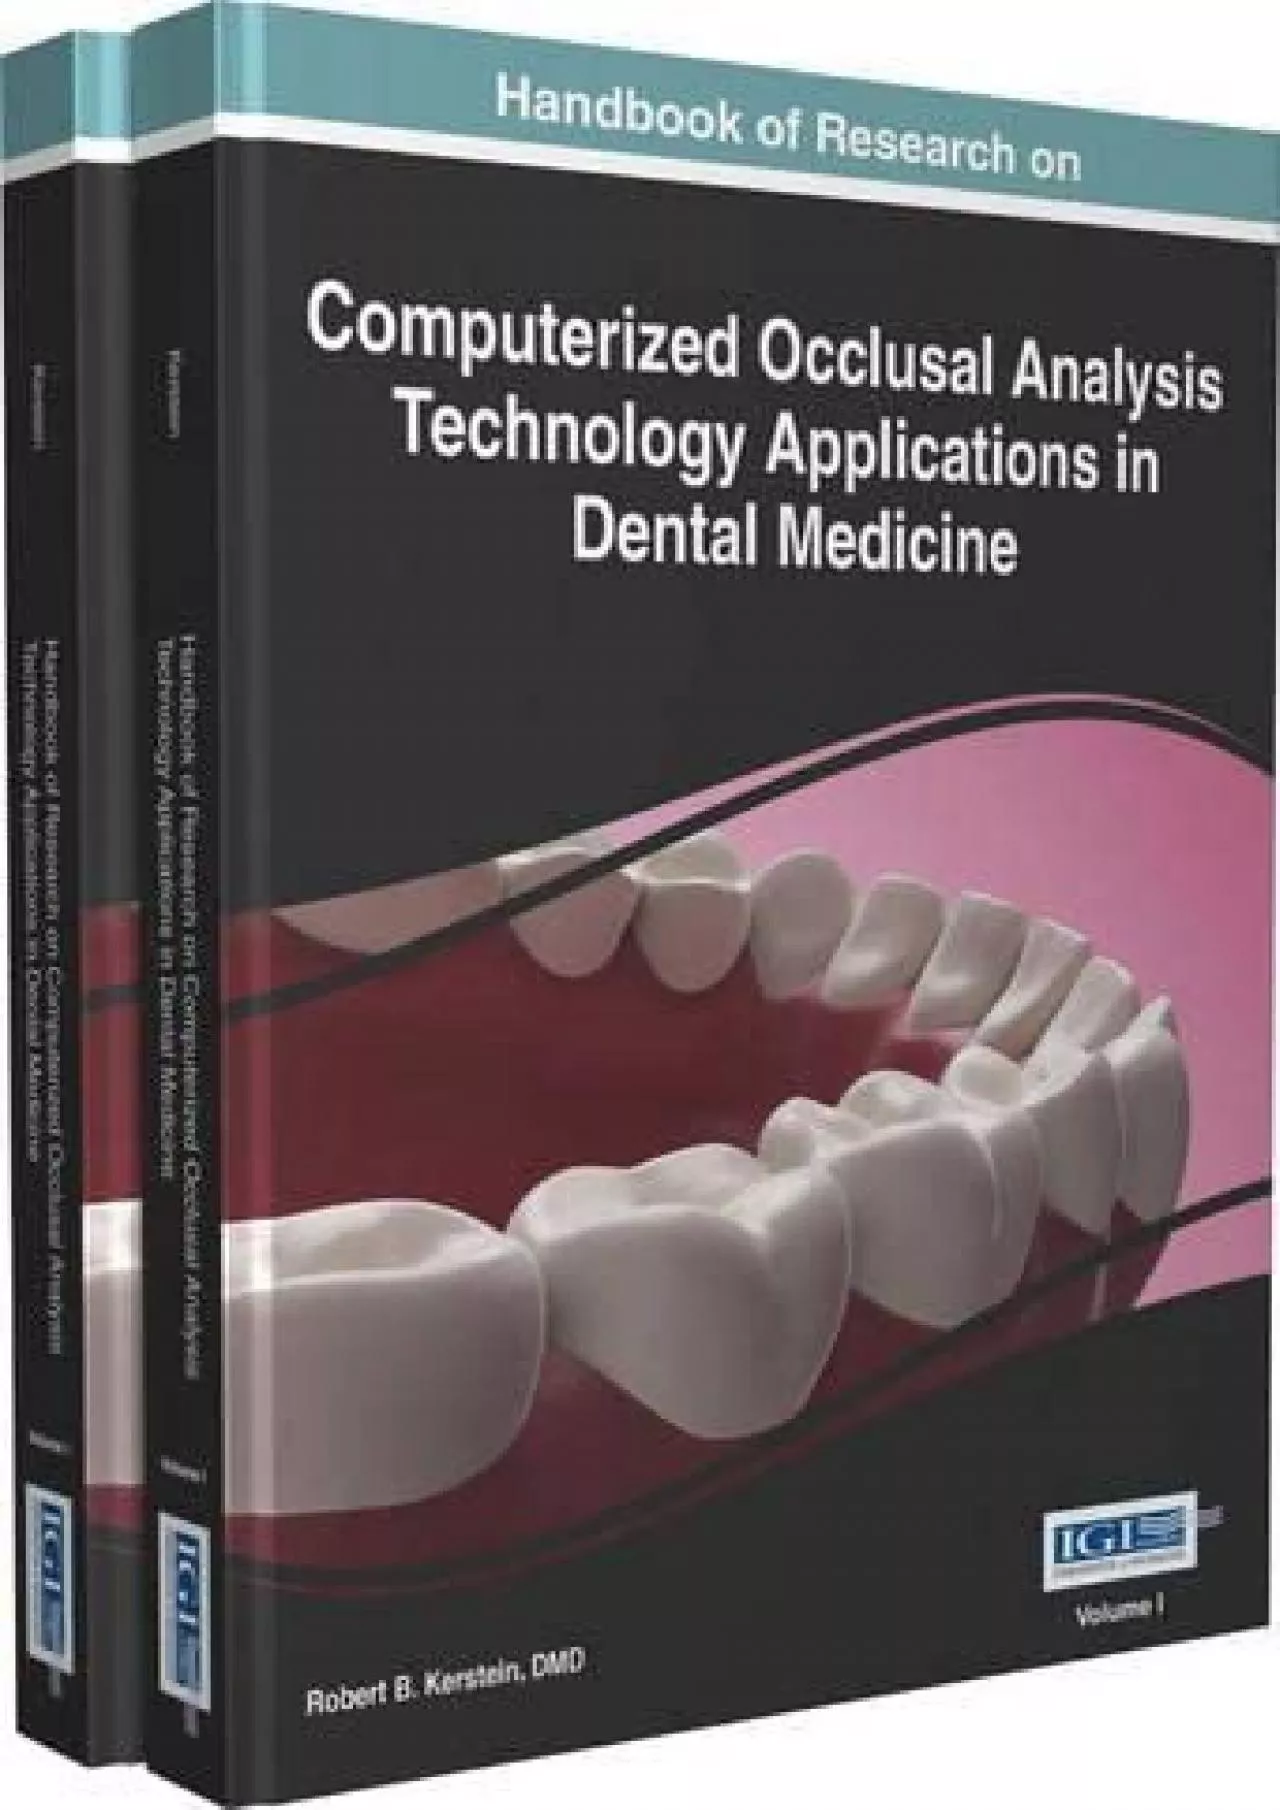 (READ)-Handbook of Research on Computerized Occlusal Analysis Technology Applications